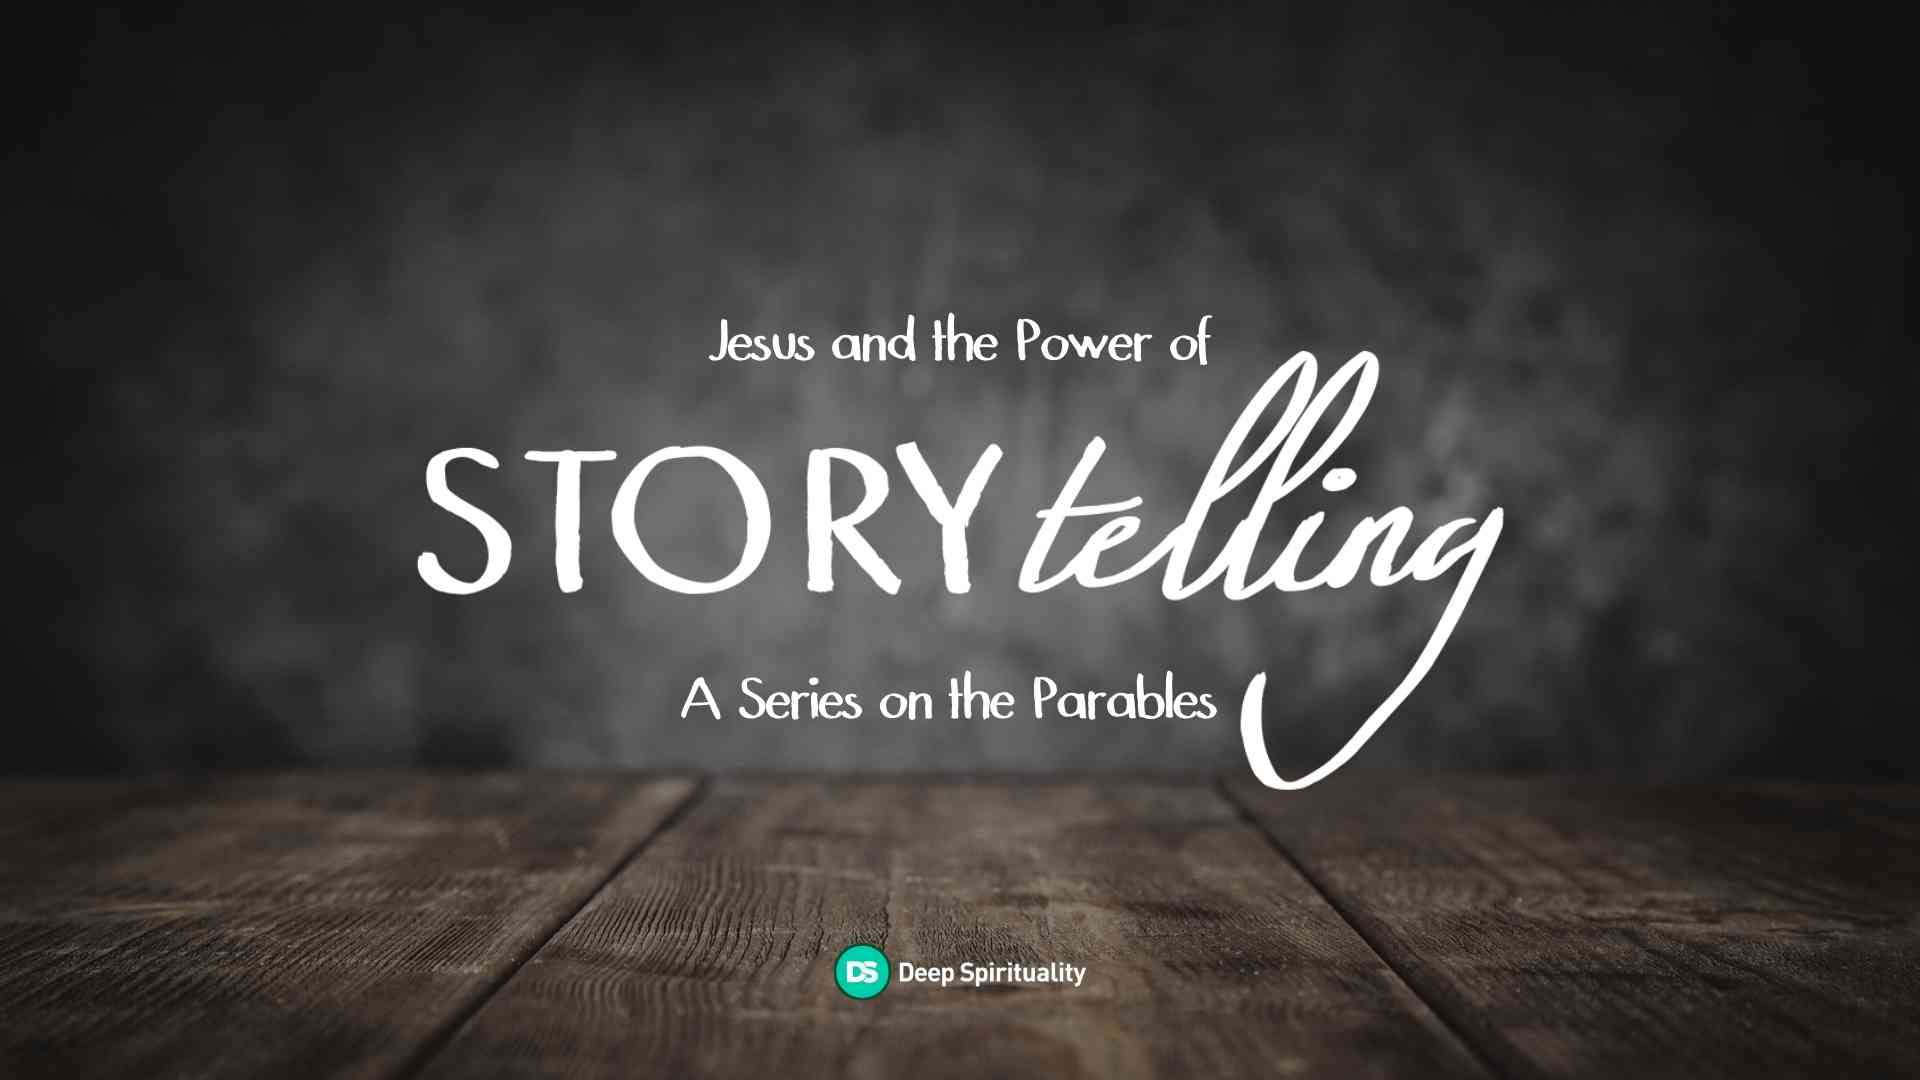 Jesus and the Power of Storytelling: Making God Personal Through Parables 27